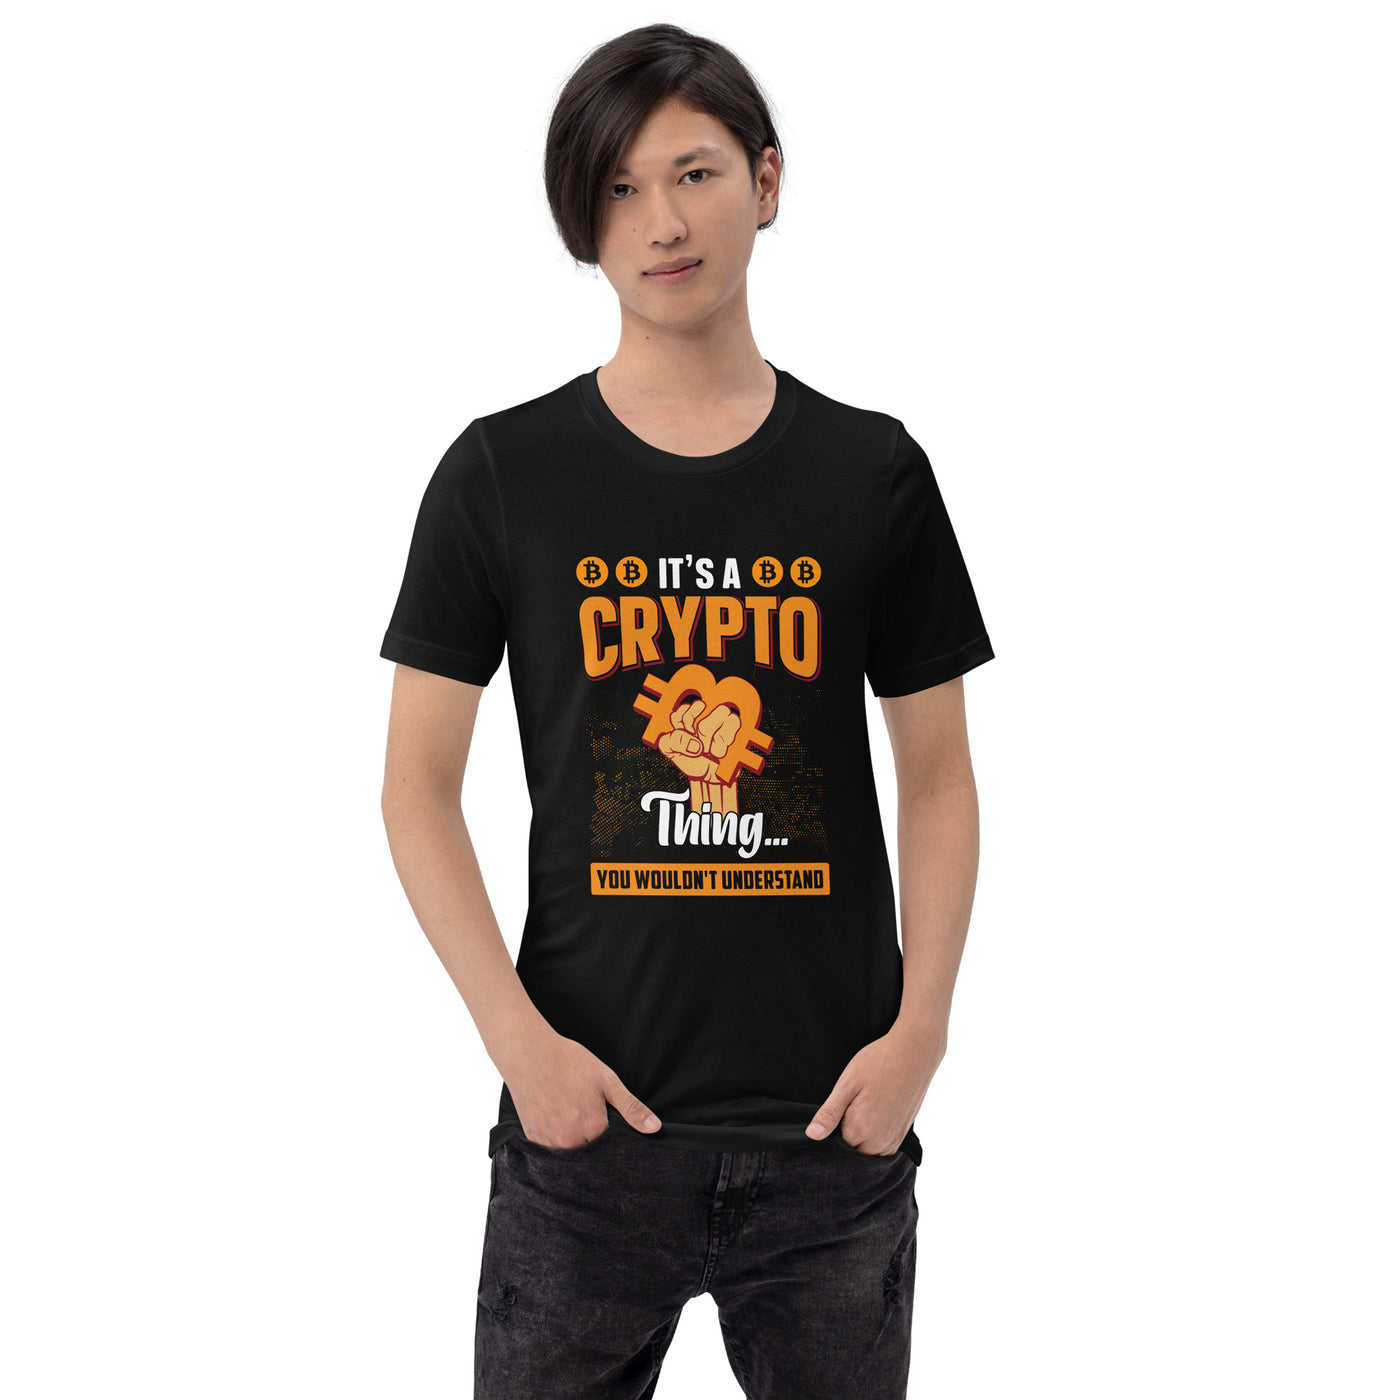 It's a Crypto thing you wouldn't understand - Unisex t-shirt